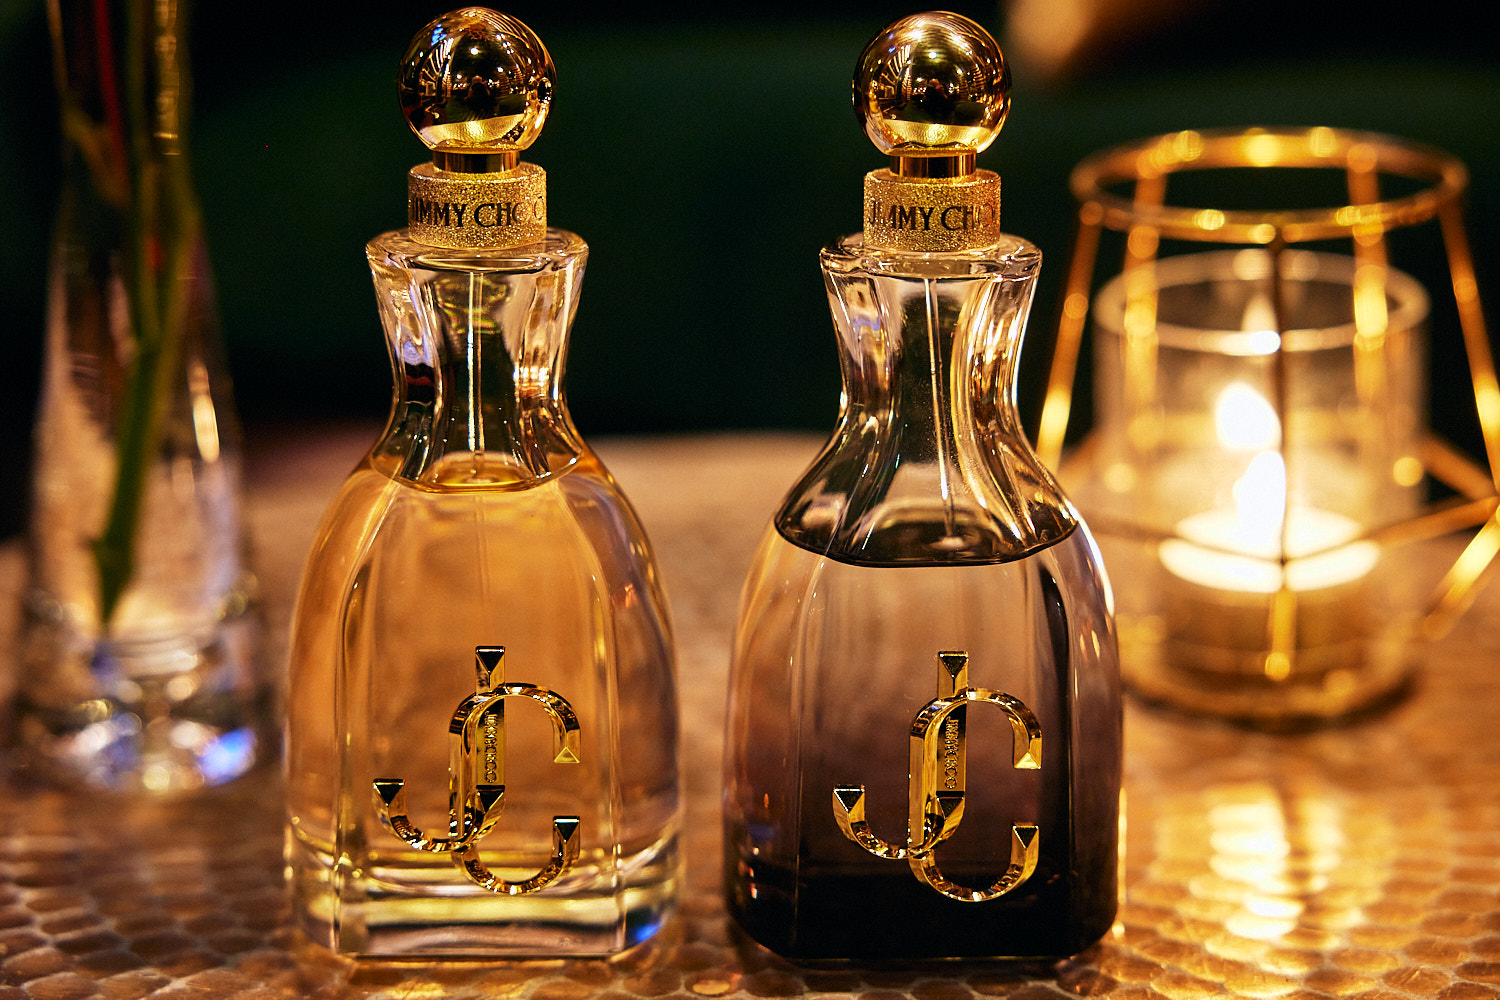 Bottles of I Want Choo Forever perfume lit by candlelight